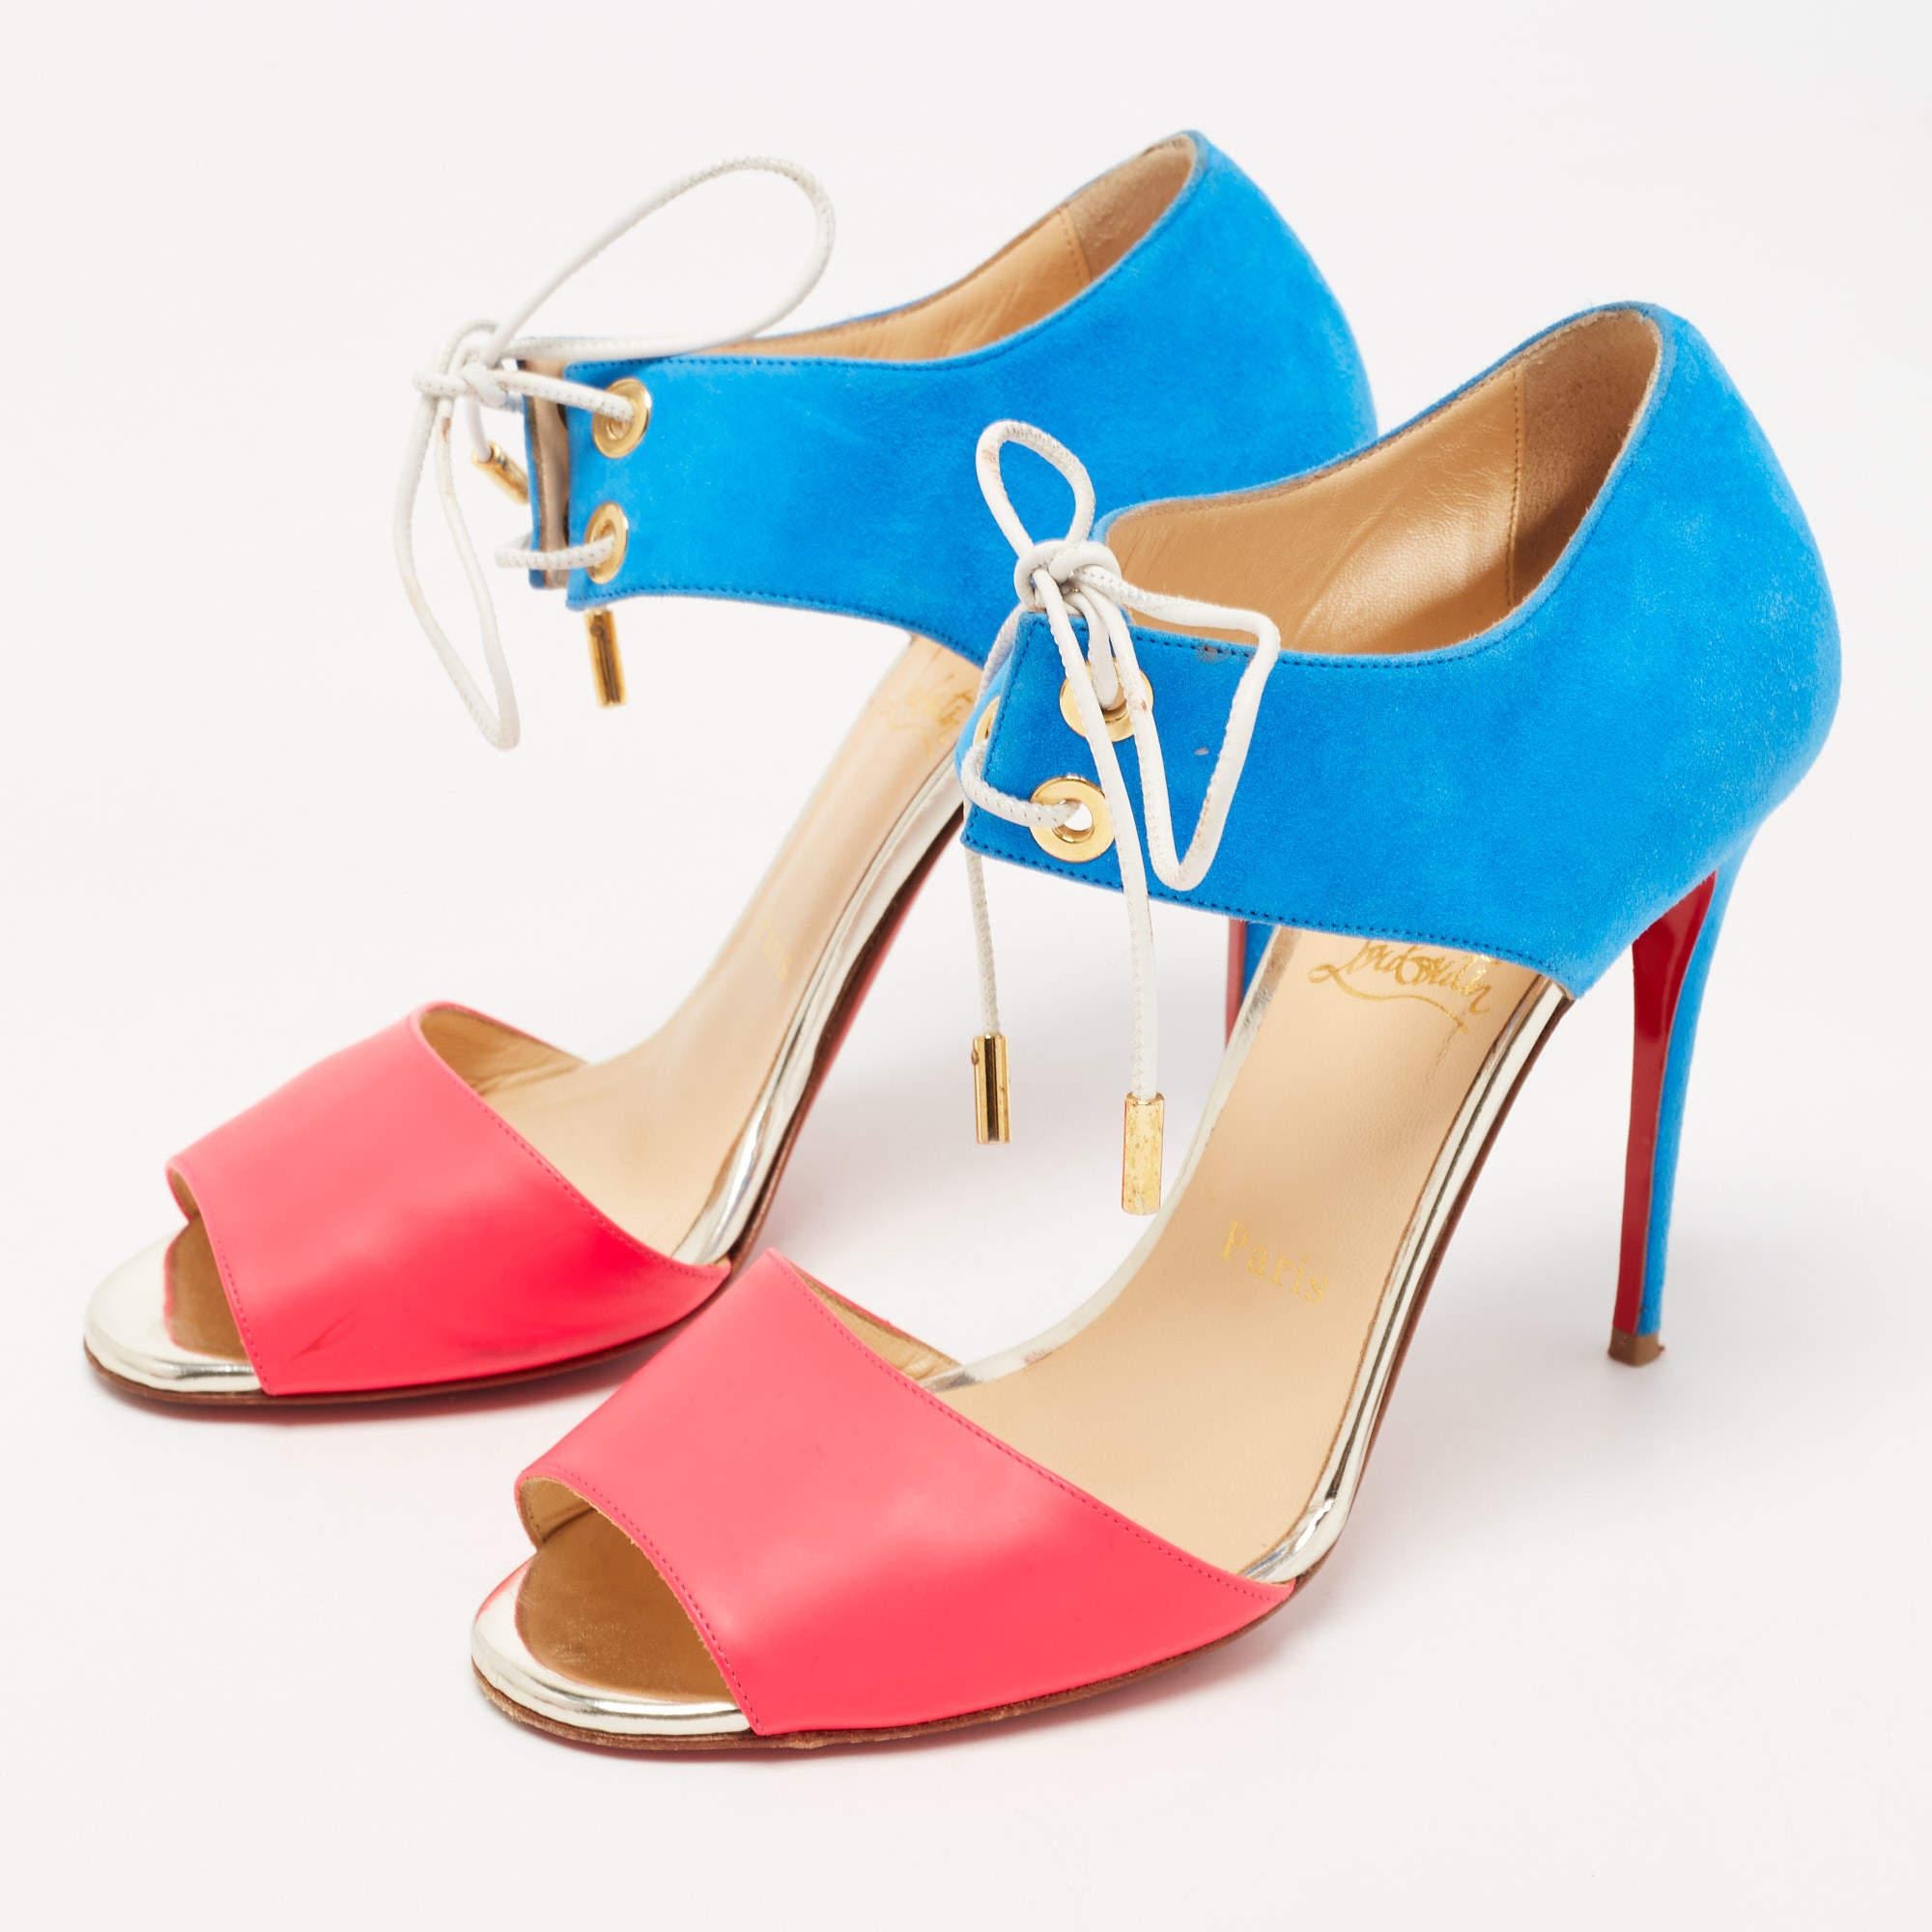 Christian Louboutin Pink/Blue Leather and Suede Mayerling Sandals Size 38.5 In Good Condition For Sale In Dubai, Al Qouz 2